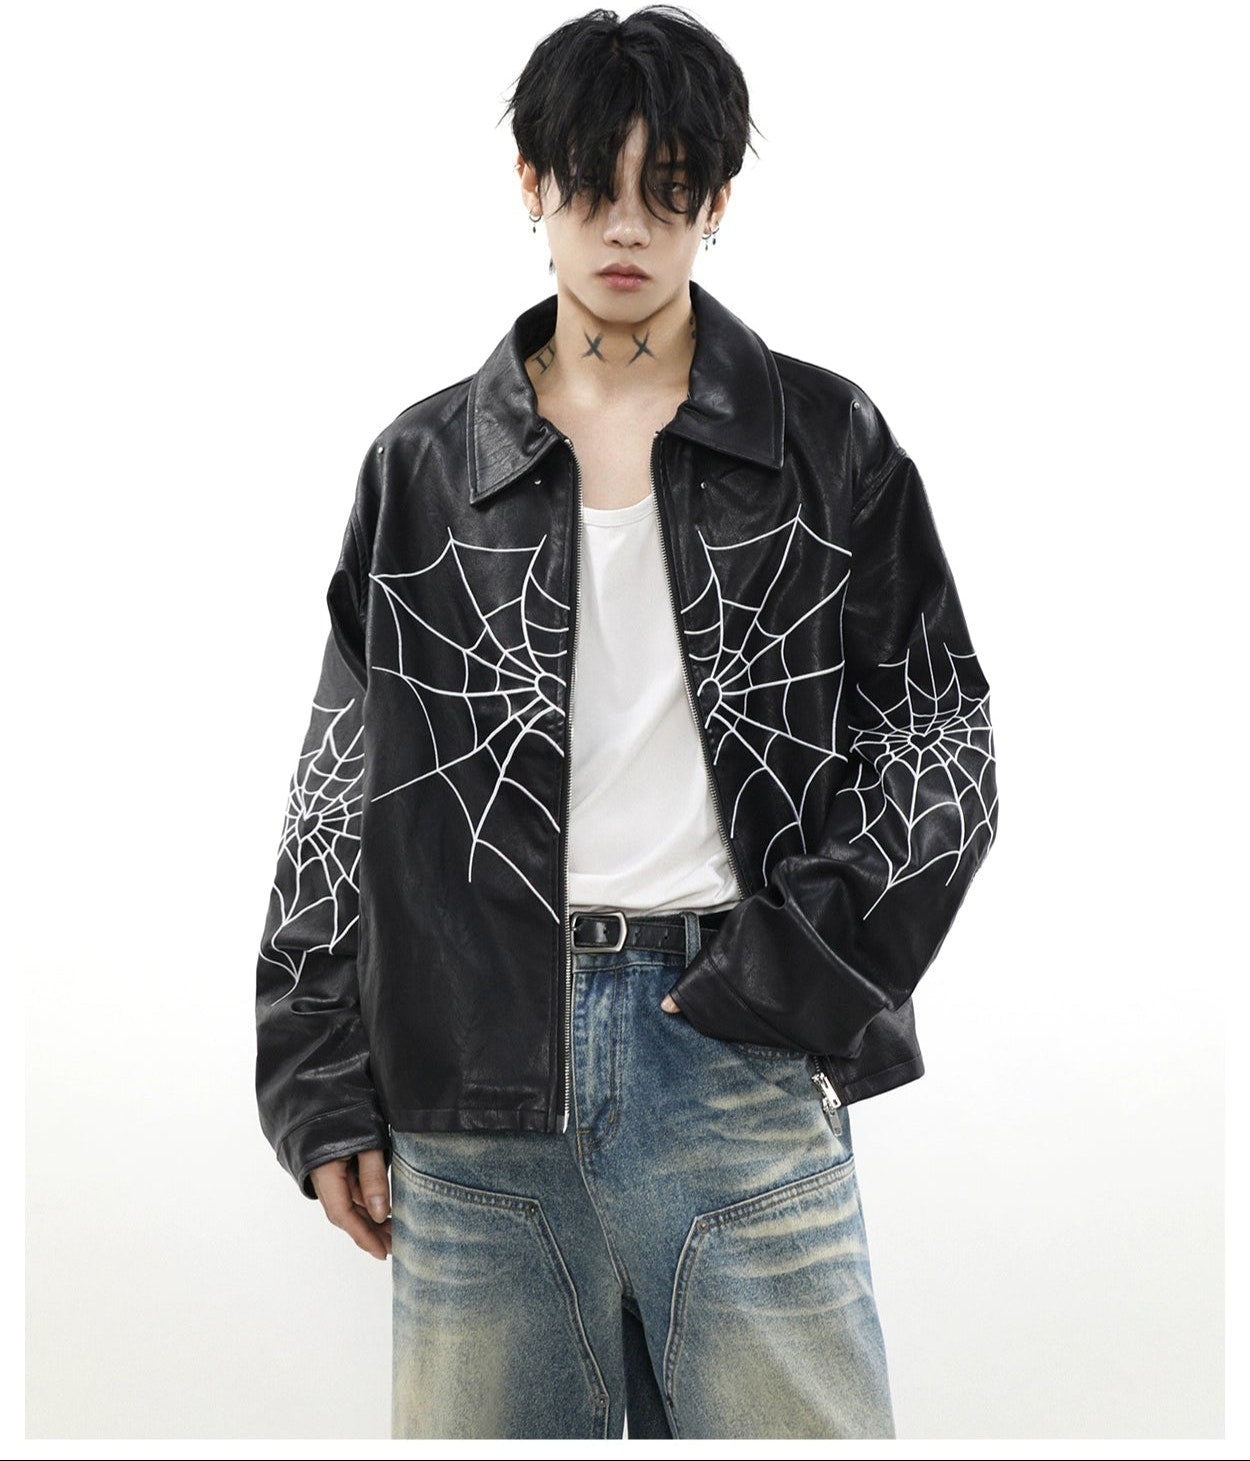 Spiderweb Print Faux Leather Bomber Jacket